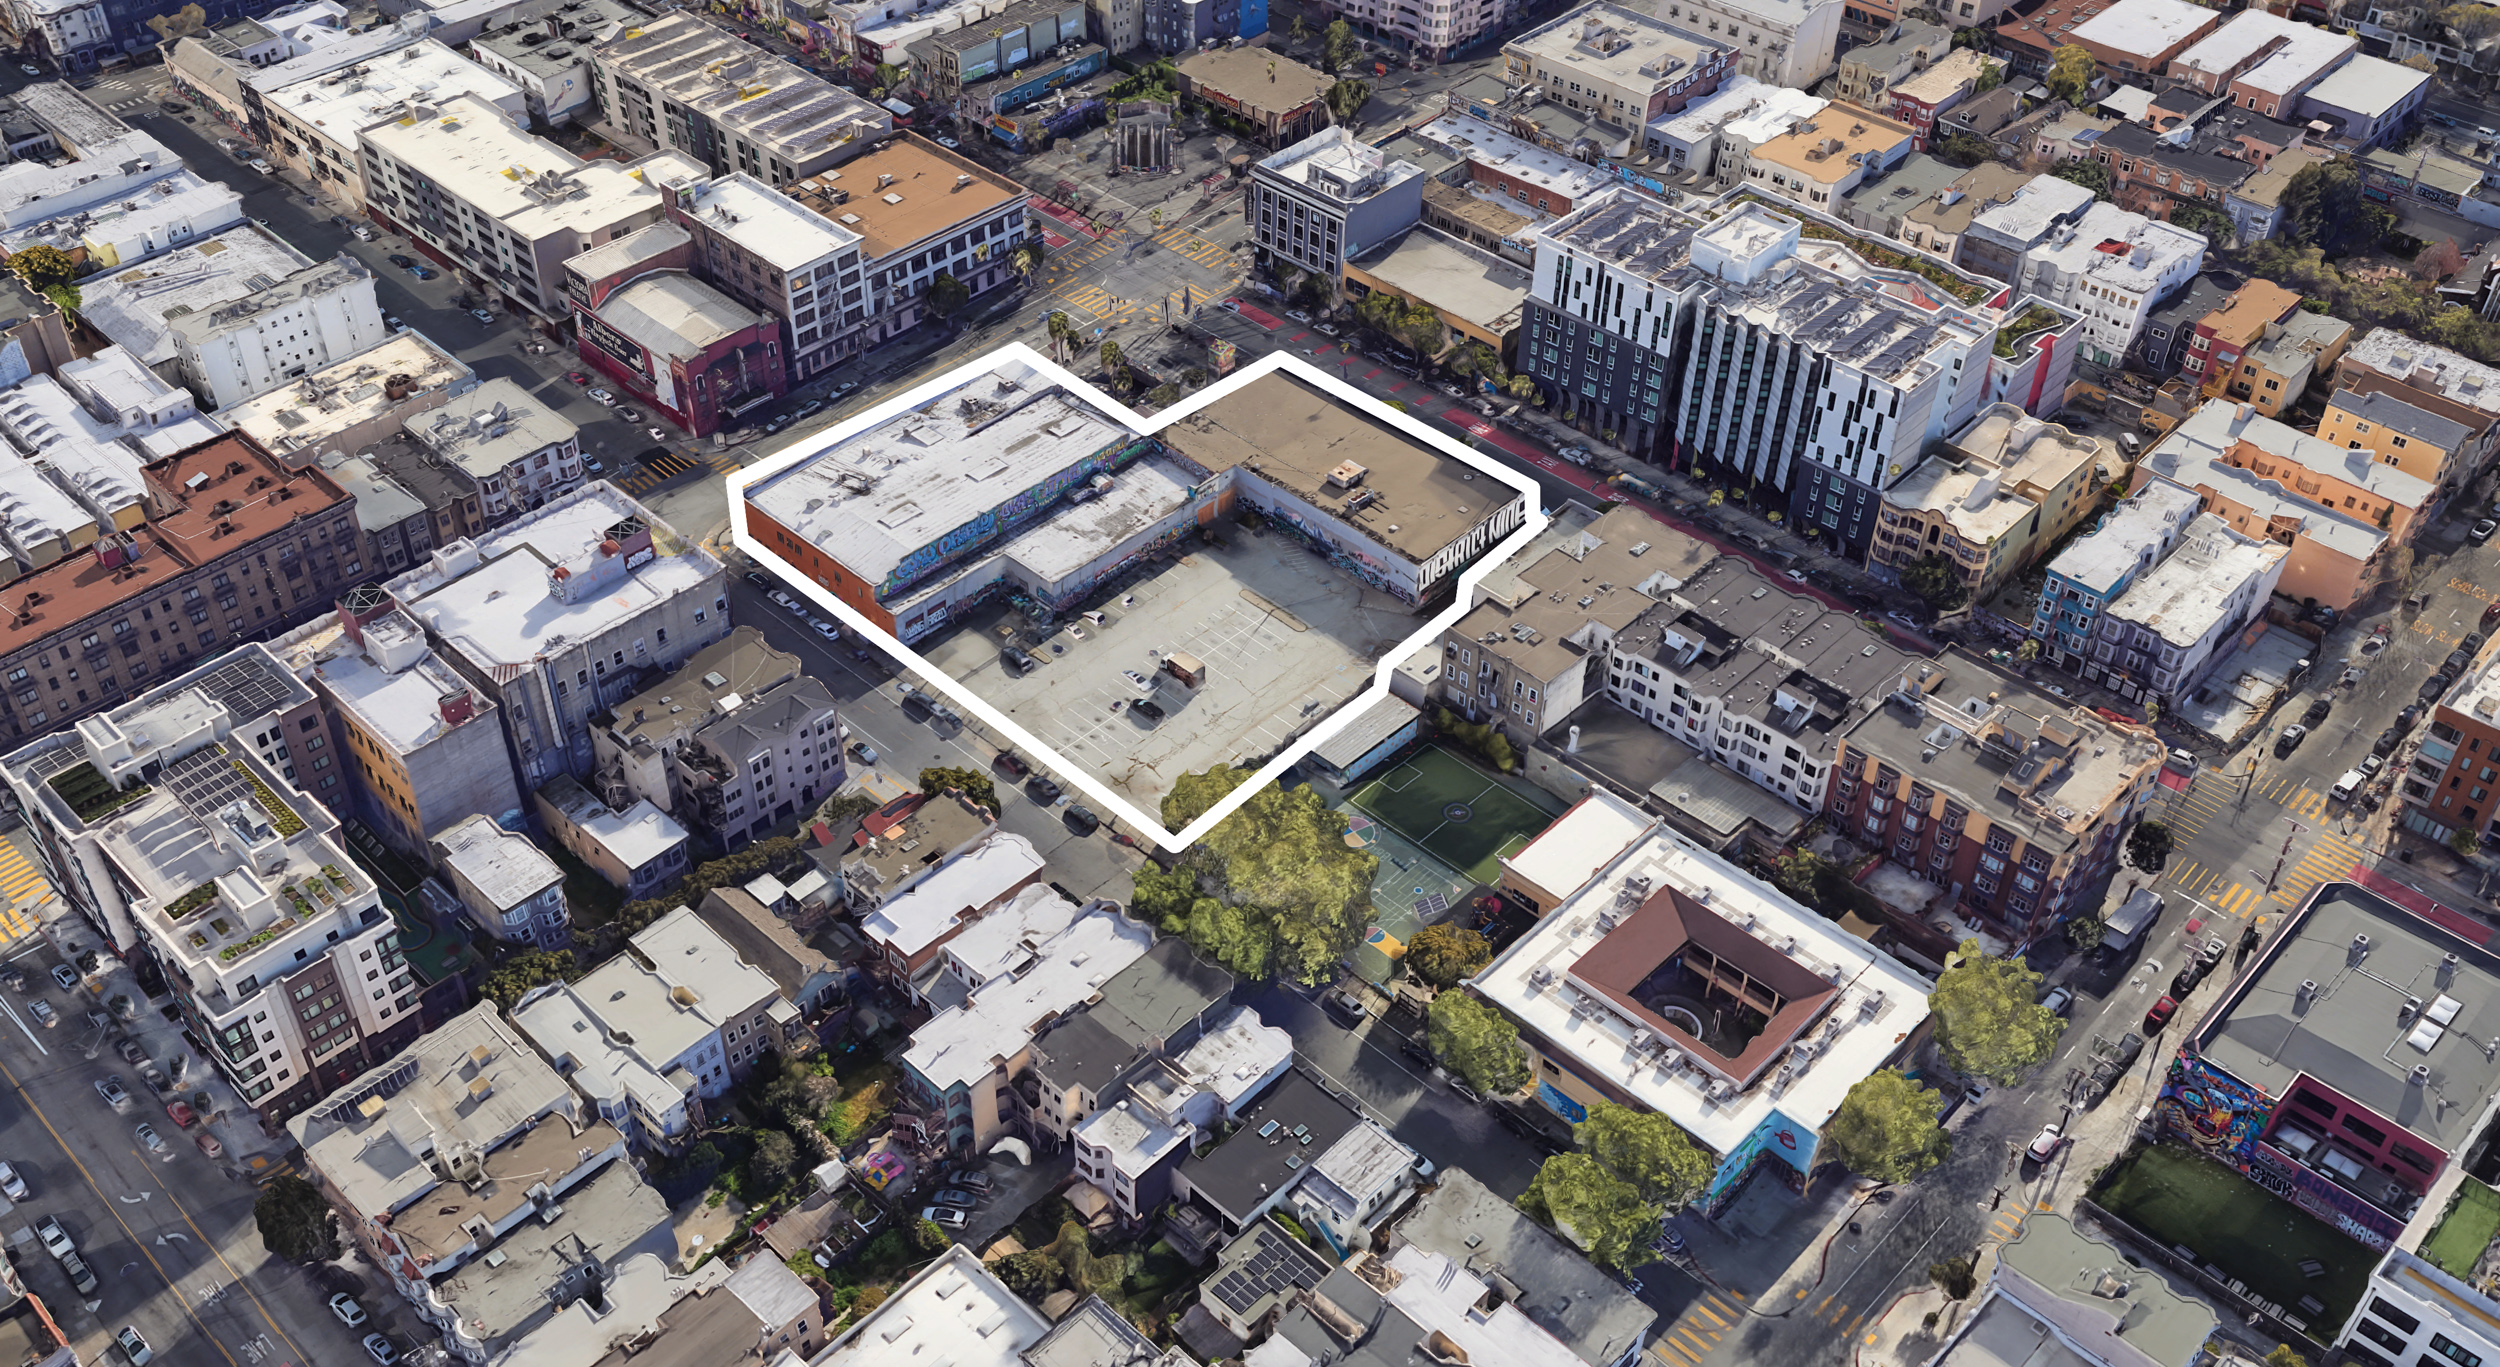 1979 Mission Street property outlined approximately according to site map, image via Google Satellite